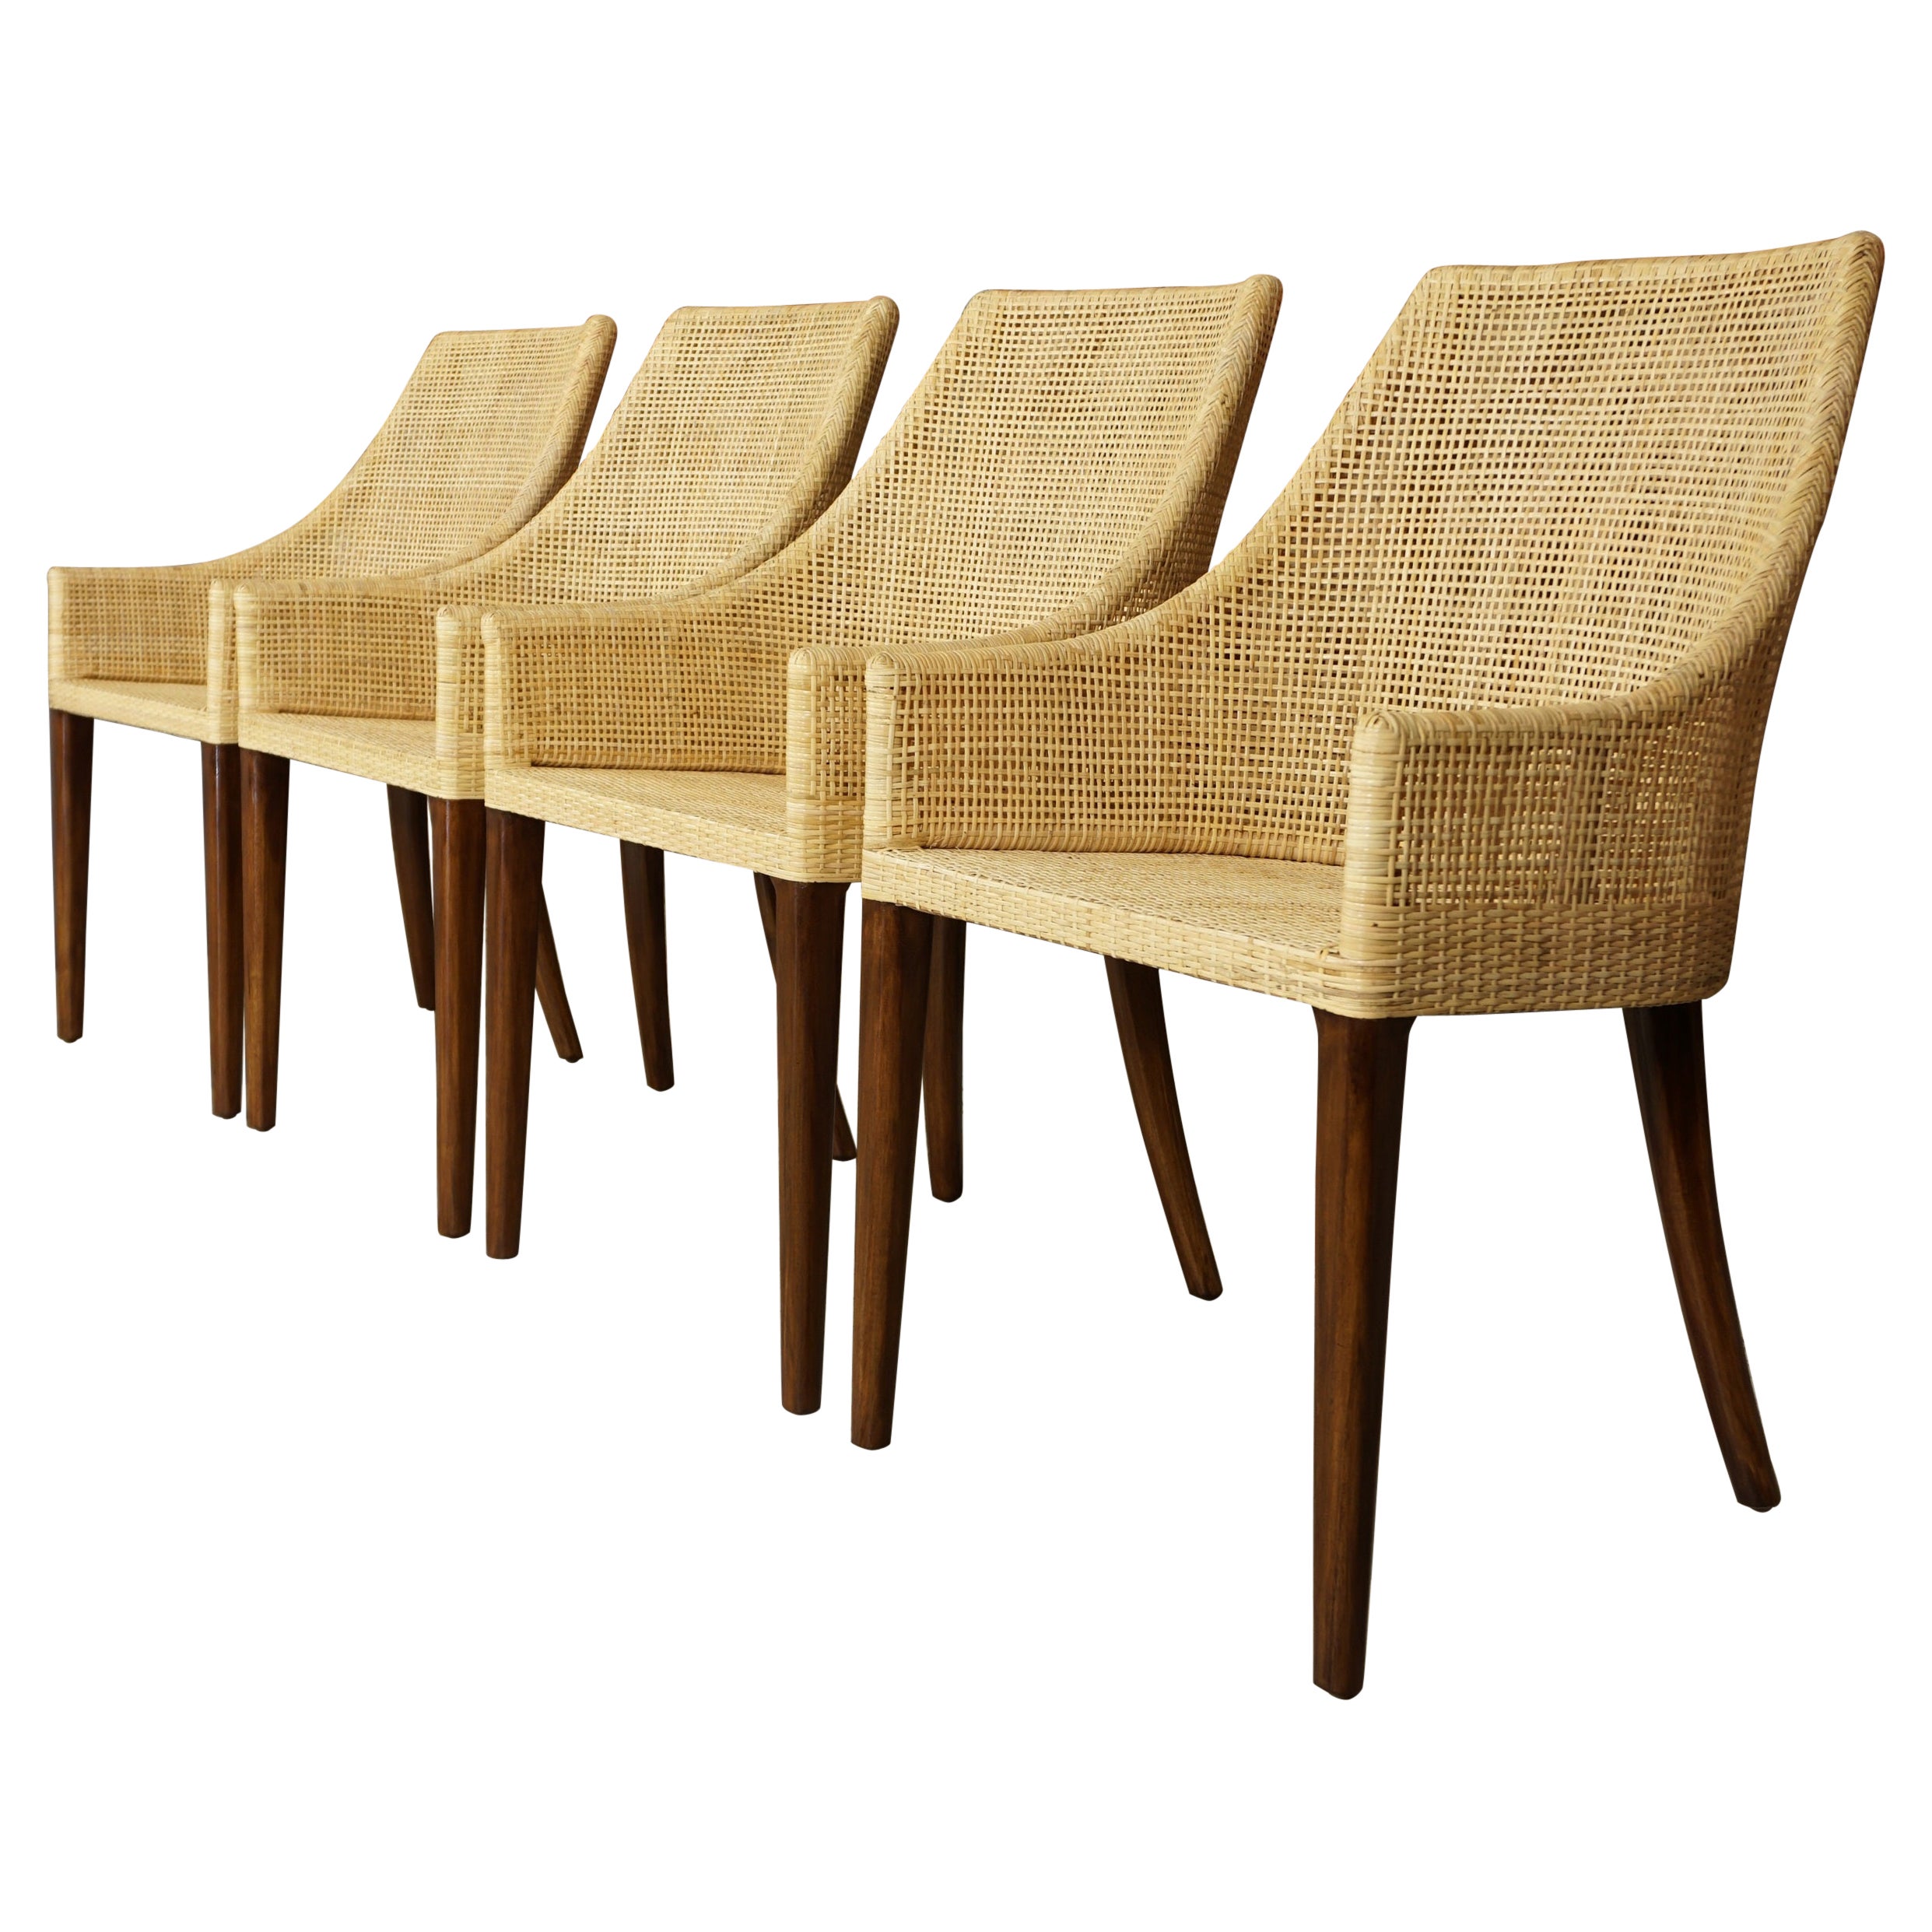 French Design Rattan and Wooden Set of 4 Chairs